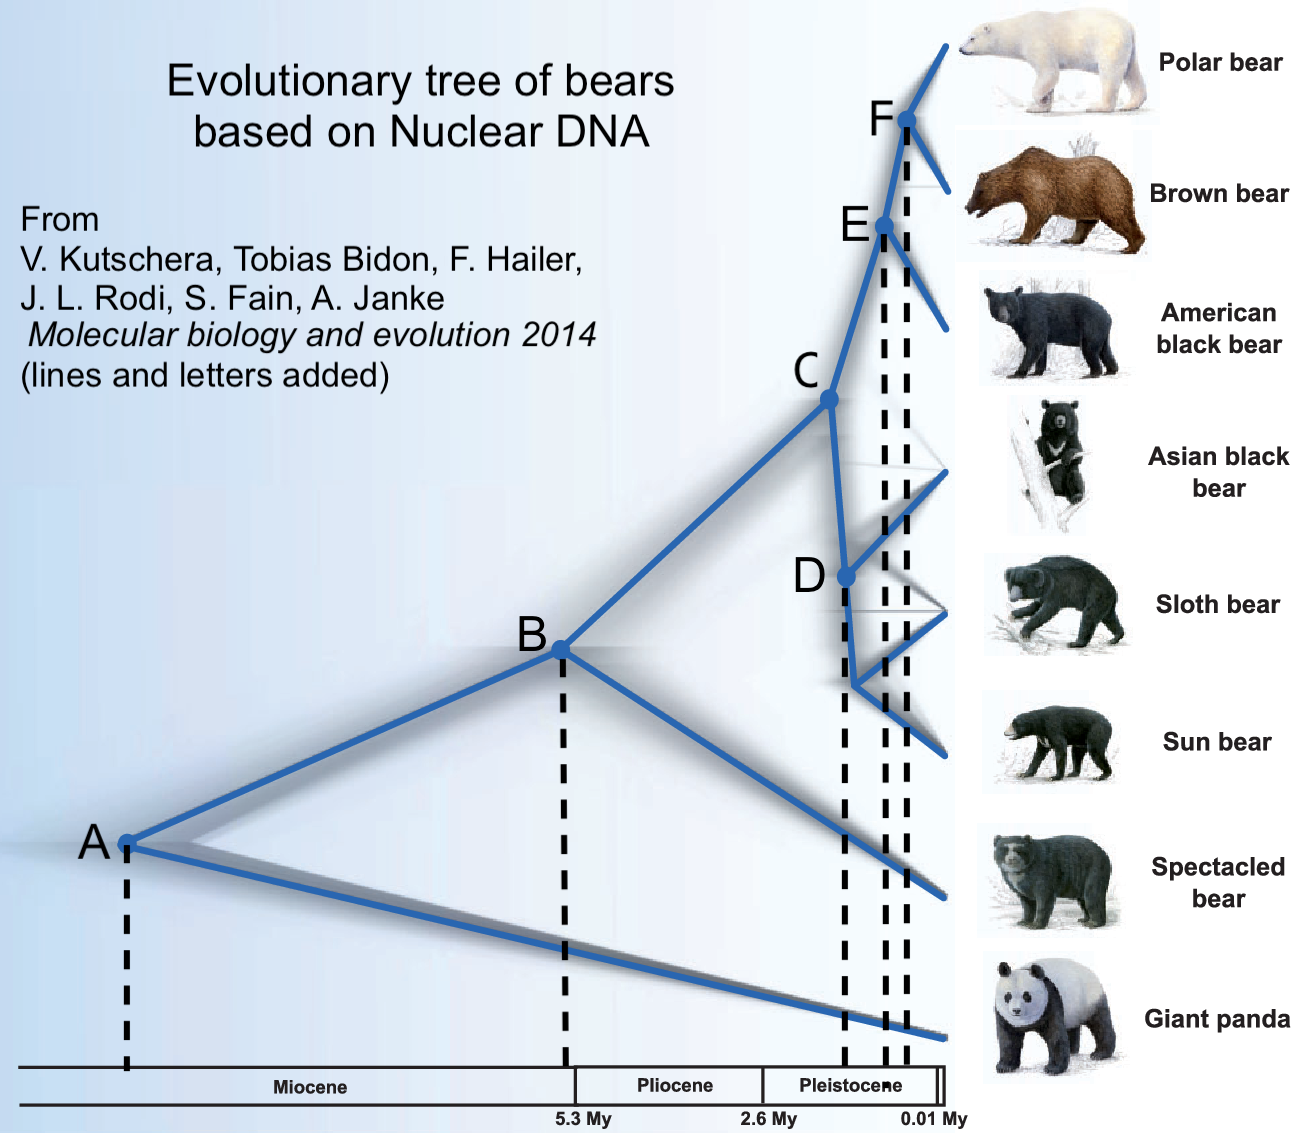 Evolutionary tree of bears based on Nuclear DNA.
Point "A" in the Miocene branches into giant panda on the lower branch and up to point "B" a little over 5.3 million years ago. Point "B" branches into the spectacled bear on the lower branch and to point "C" on the upper branch. Point "C" is during the early Pleistocene and branches into points "E" and "D". Point "E" in the mid-late Pleistocene leads to the American black bear on the lower branch and to point "F" on the upper branch, which split off to polar bear and brown bear. Point "D" branches to the Asian black bear and another branching point that leads to sloth bear and sun bear.
From V. Kustchera, Tobias Bidon, F. Hailer, J. L. Rodi, S. Fain, A. Janke, Molecular biology and evolution 2014 (lines and letters added).